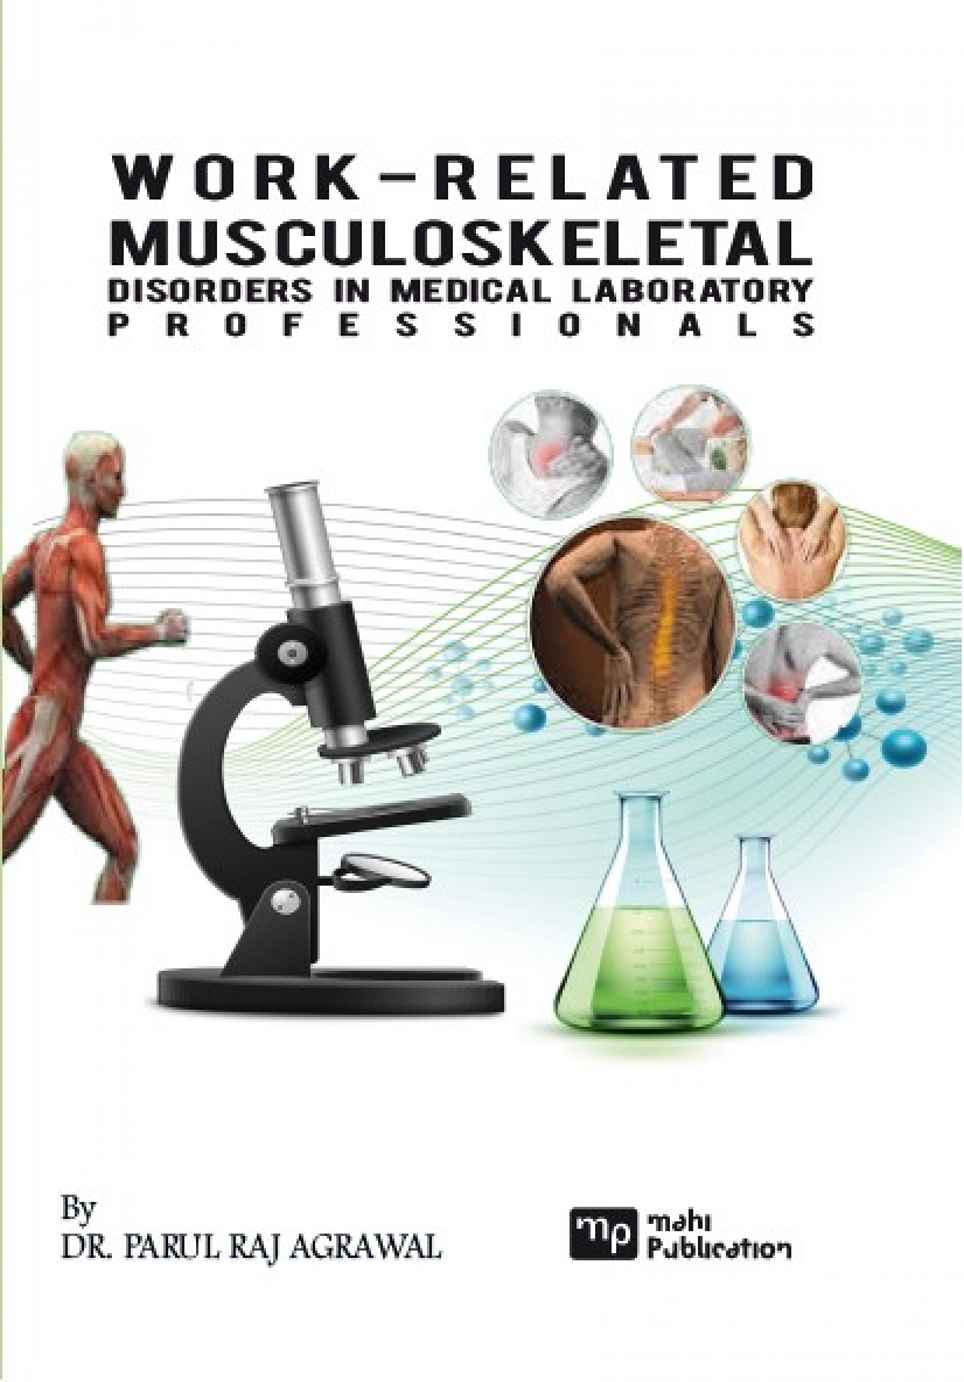 Work-Related Musculoskeletal Disorders in Medical Laboratory Professionals